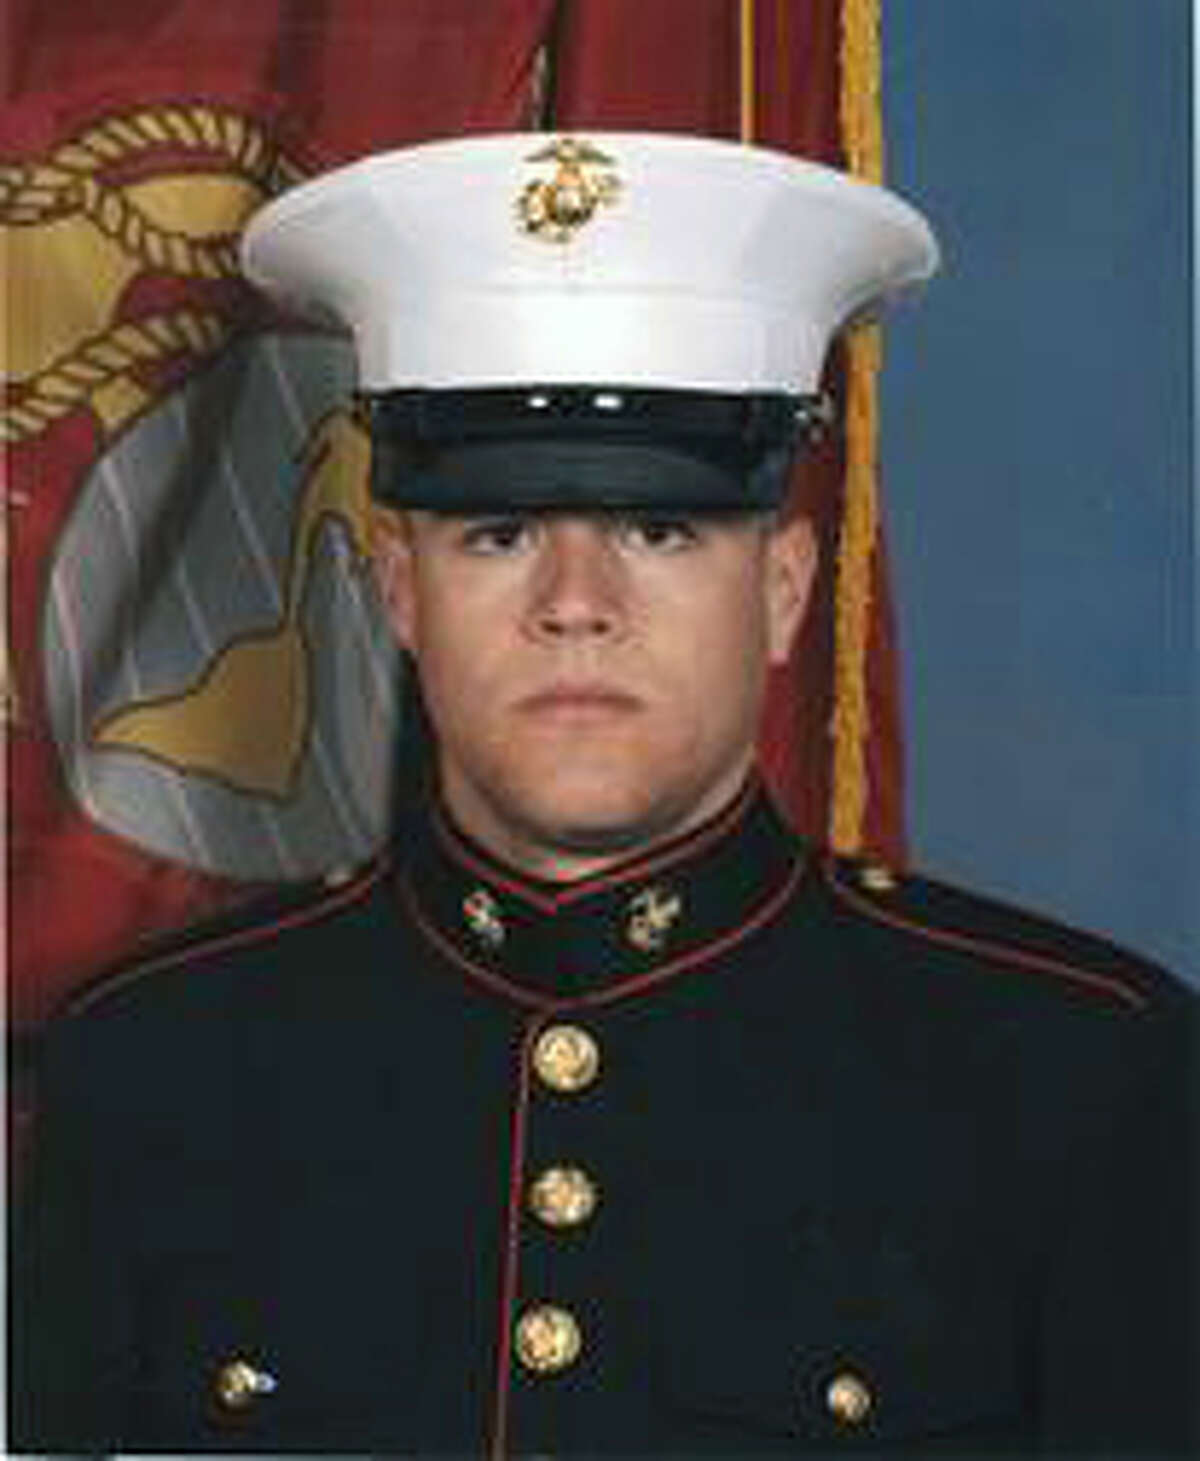 Marine Lance Cpl. Benjamin Whetstone Schmidt, 24, who died on the eve of today’s 10th anniversary of the start of the Afghan war, was the son of Becky Whetstone and Dr. David Schmidt, team physician for the Spurs.